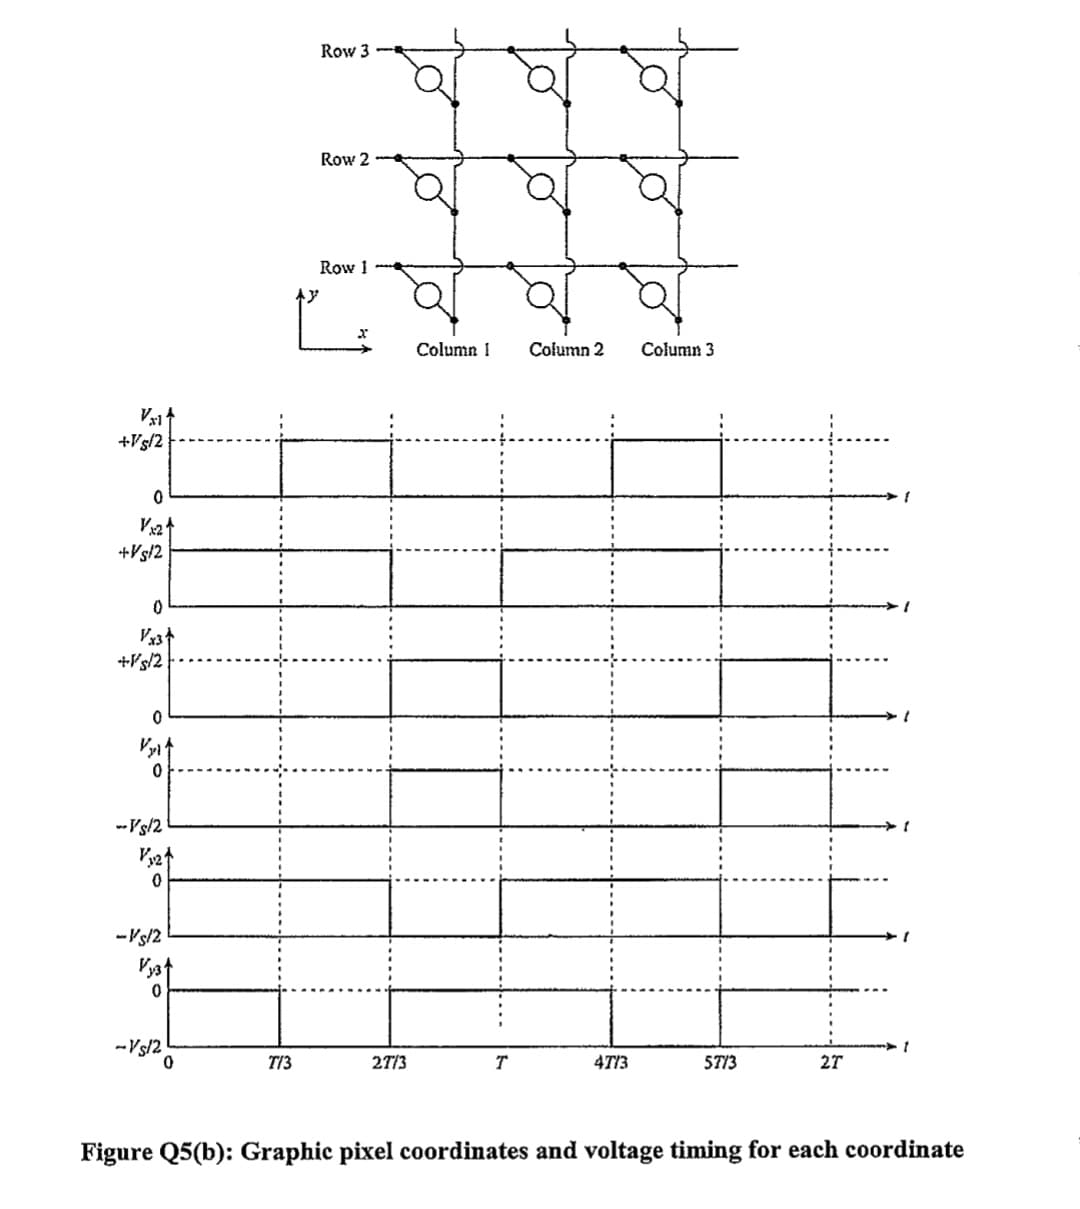 Row 3
Row 2
Row 1
Column 1
Column 2
Column 3
+Vs/2
+Vs/2
+Vs/2
Vyit
--Vs/2
--Vs/2
Vyst
--Vs/2
T/3
27/3
4T13
57/3
27
Figure Q5(b): Graphic pixel coordinates and voltage timing for each coordinate
